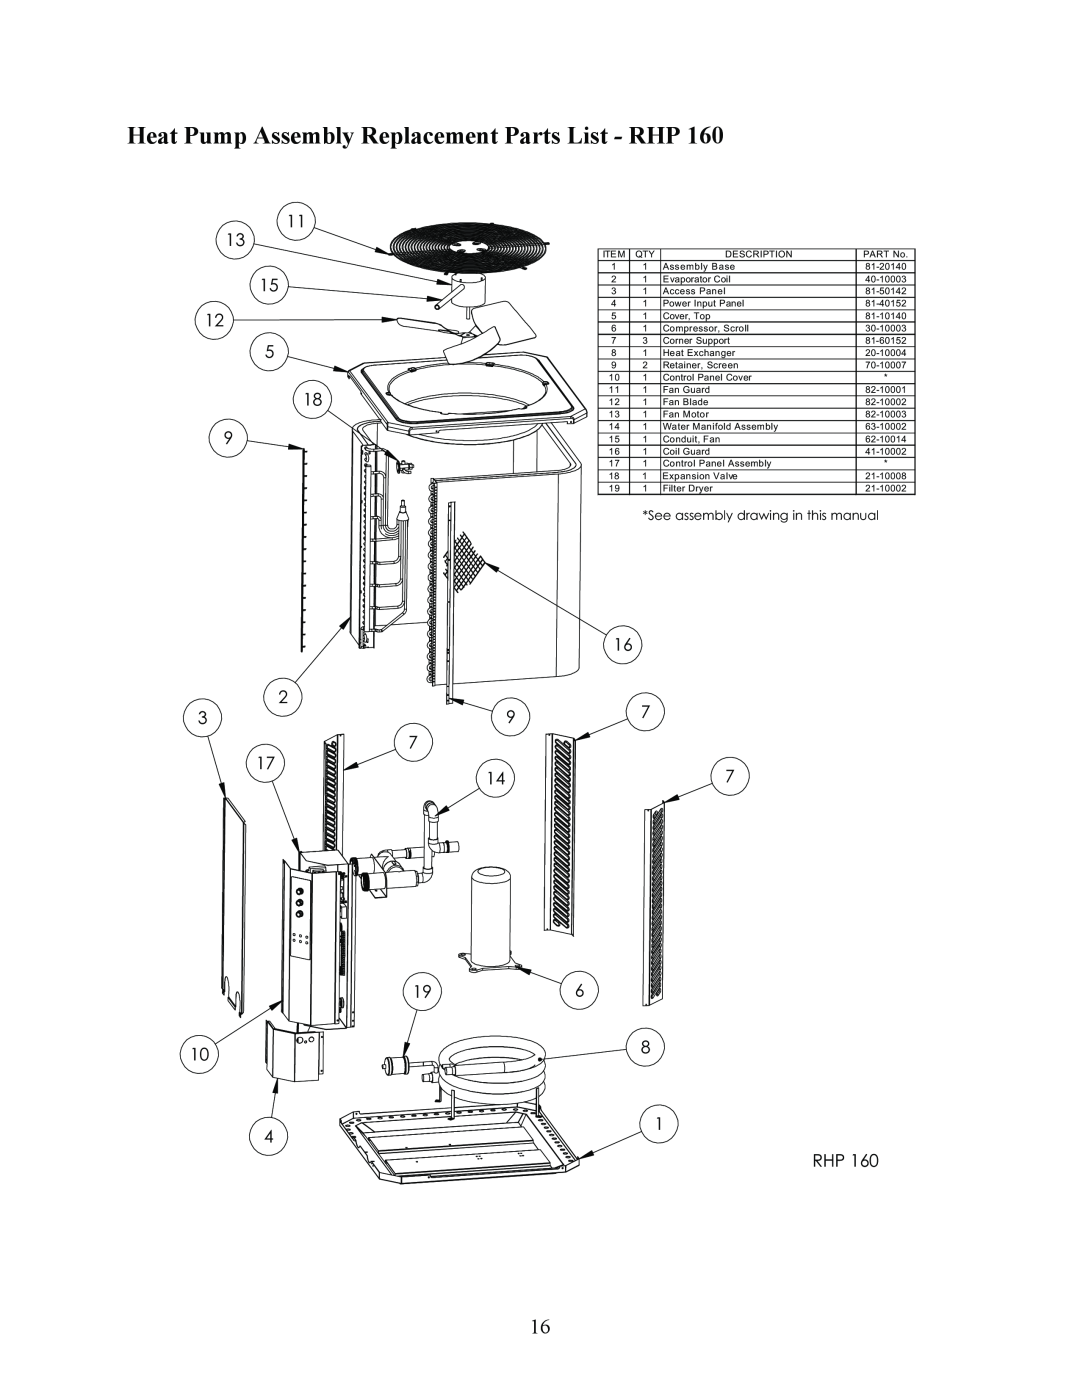 Raypak RHP100, RHP115, RHP160 Heat Pump Assembly Replacement Parts List - RHP, See assembly drawing in this manual 